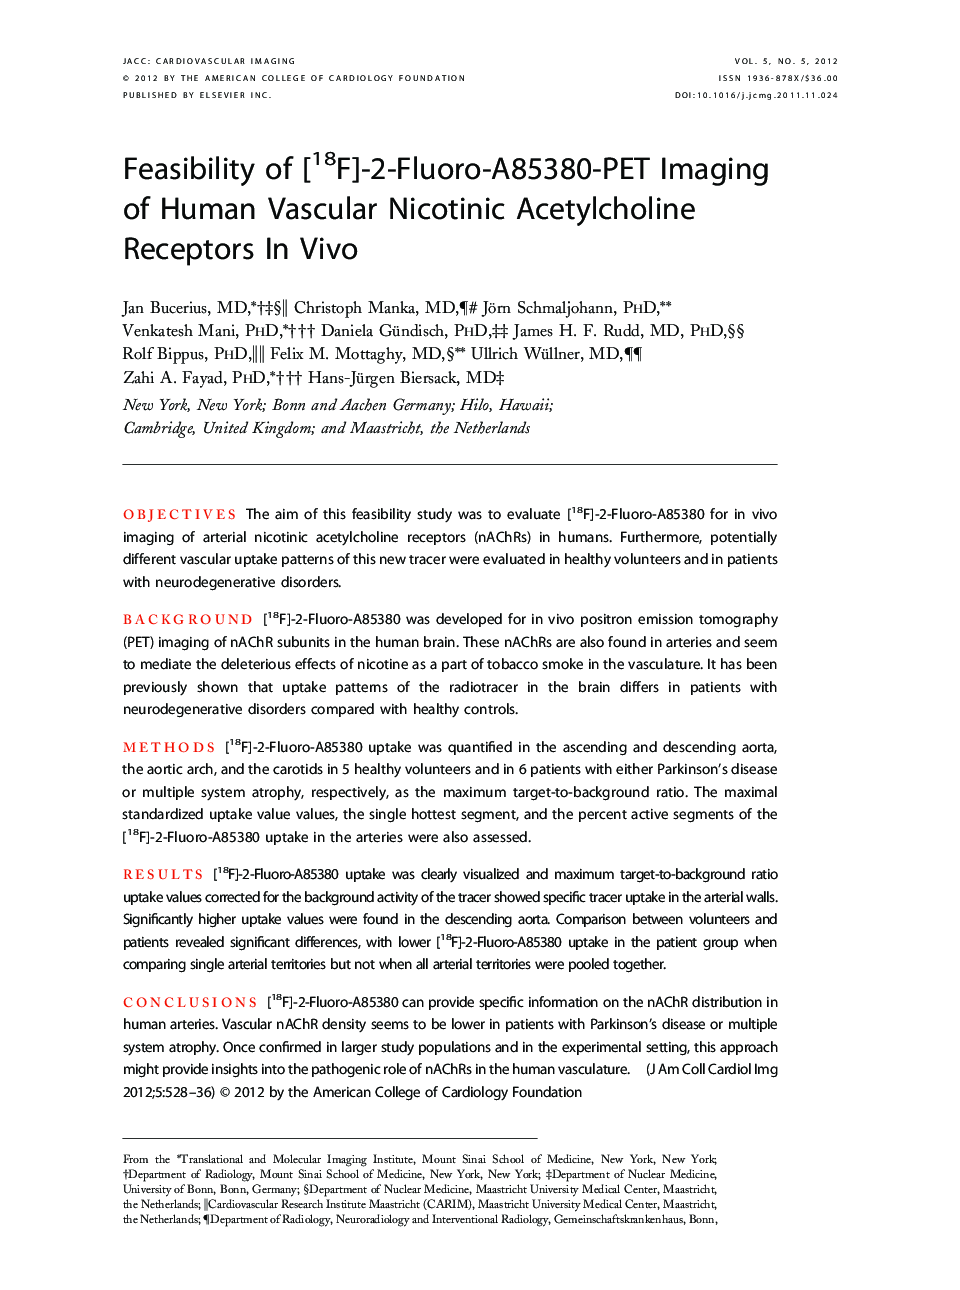 Feasibility of [18F]-2-Fluoro-A85380-PET Imaging of Human Vascular Nicotinic Acetylcholine Receptors In Vivo 